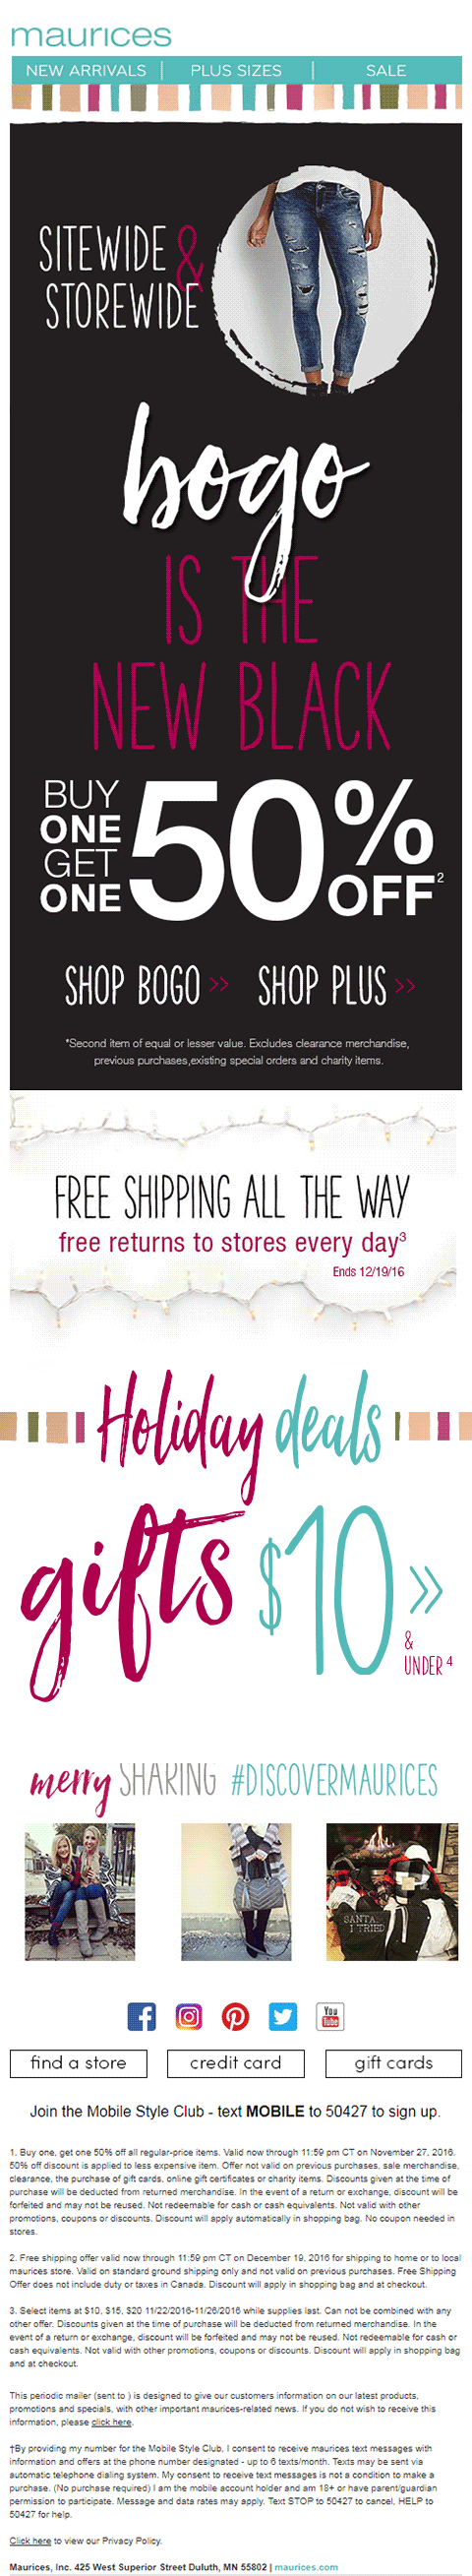 Maurices_black friday email